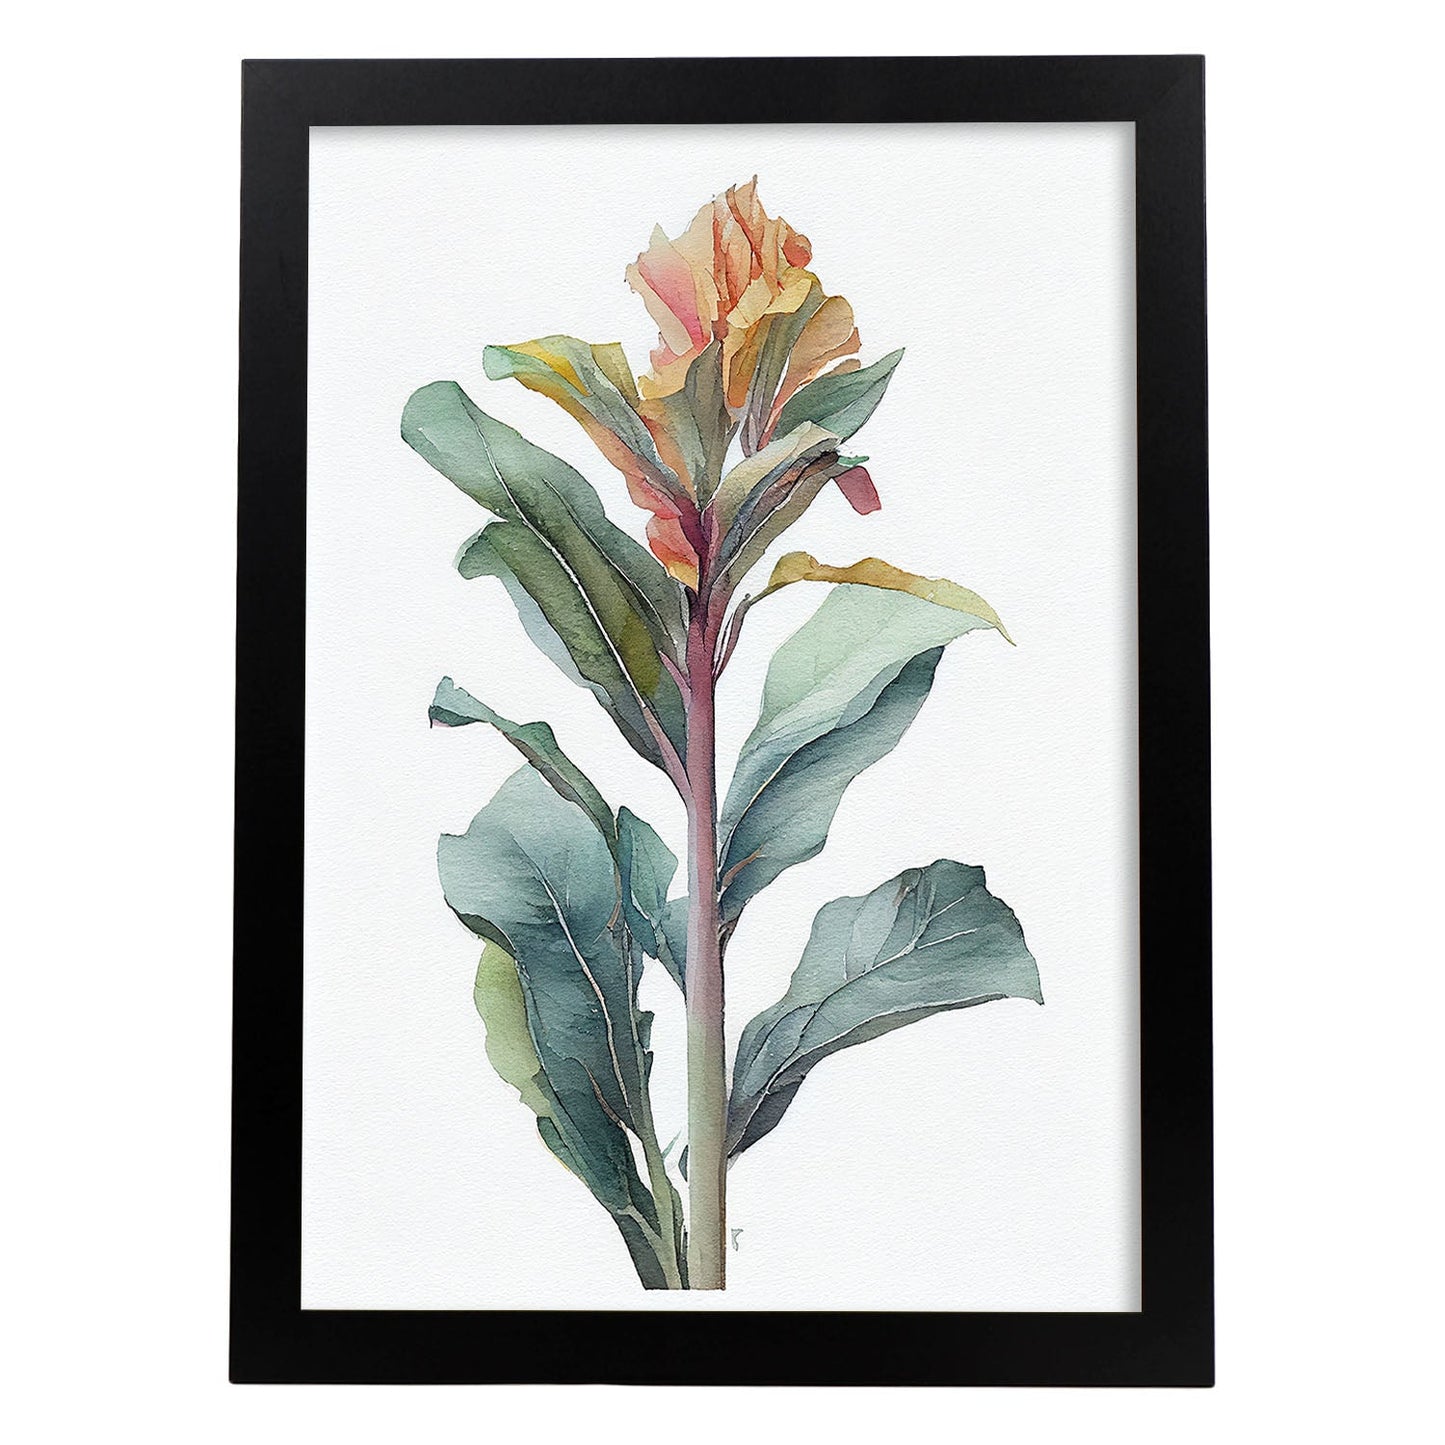 Nacnic watercolor minmal Canna_2. Aesthetic Wall Art Prints for Bedroom or Living Room Design.